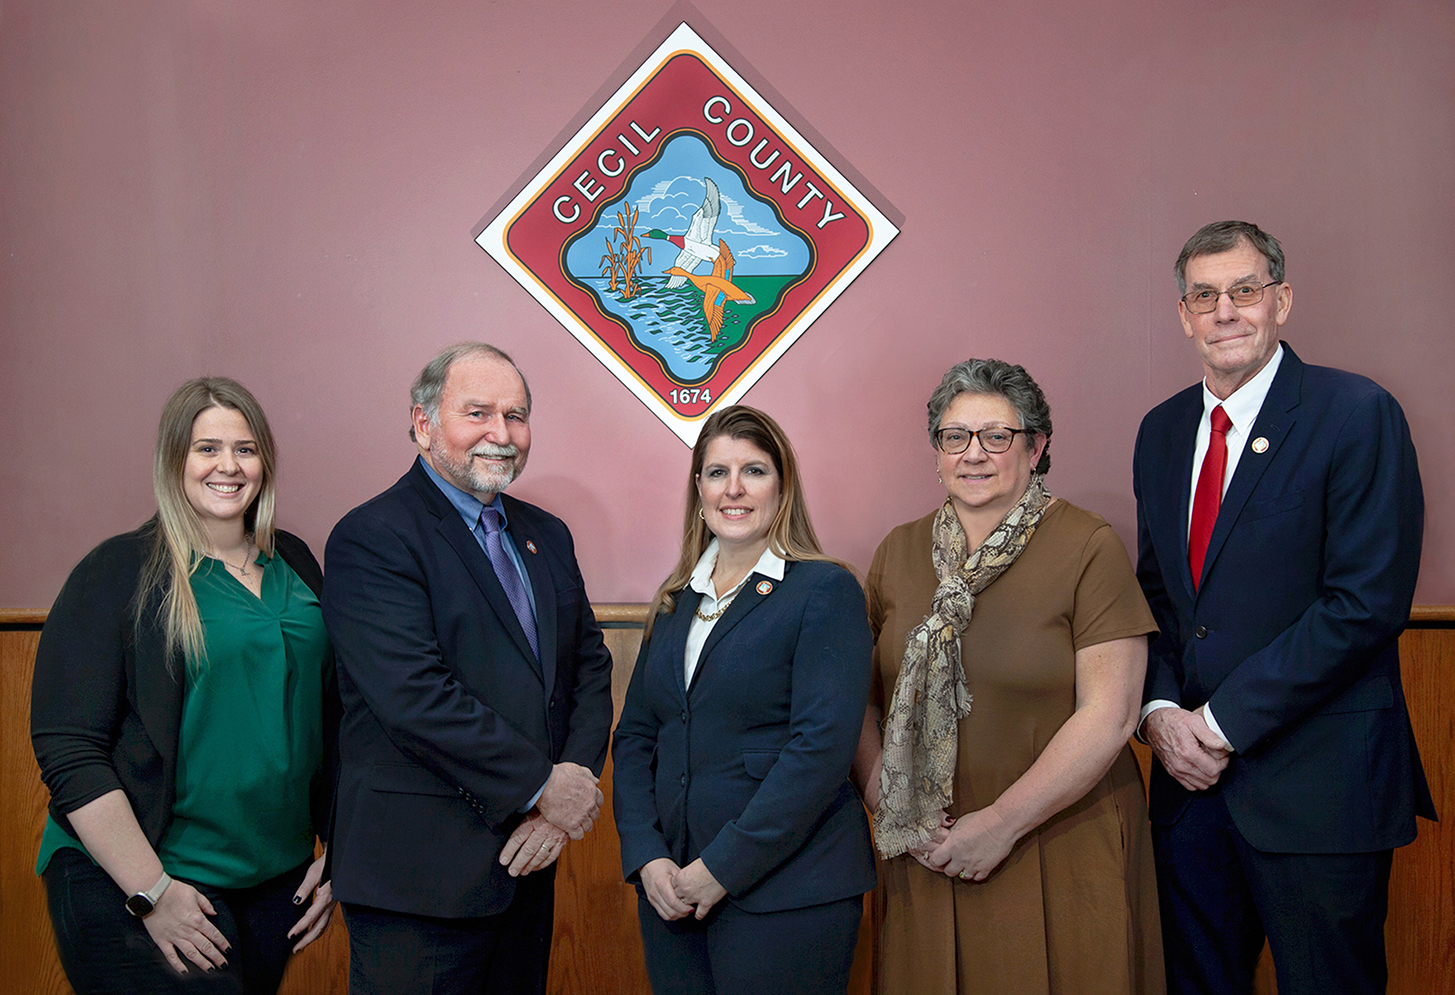 Cecil County Council Members